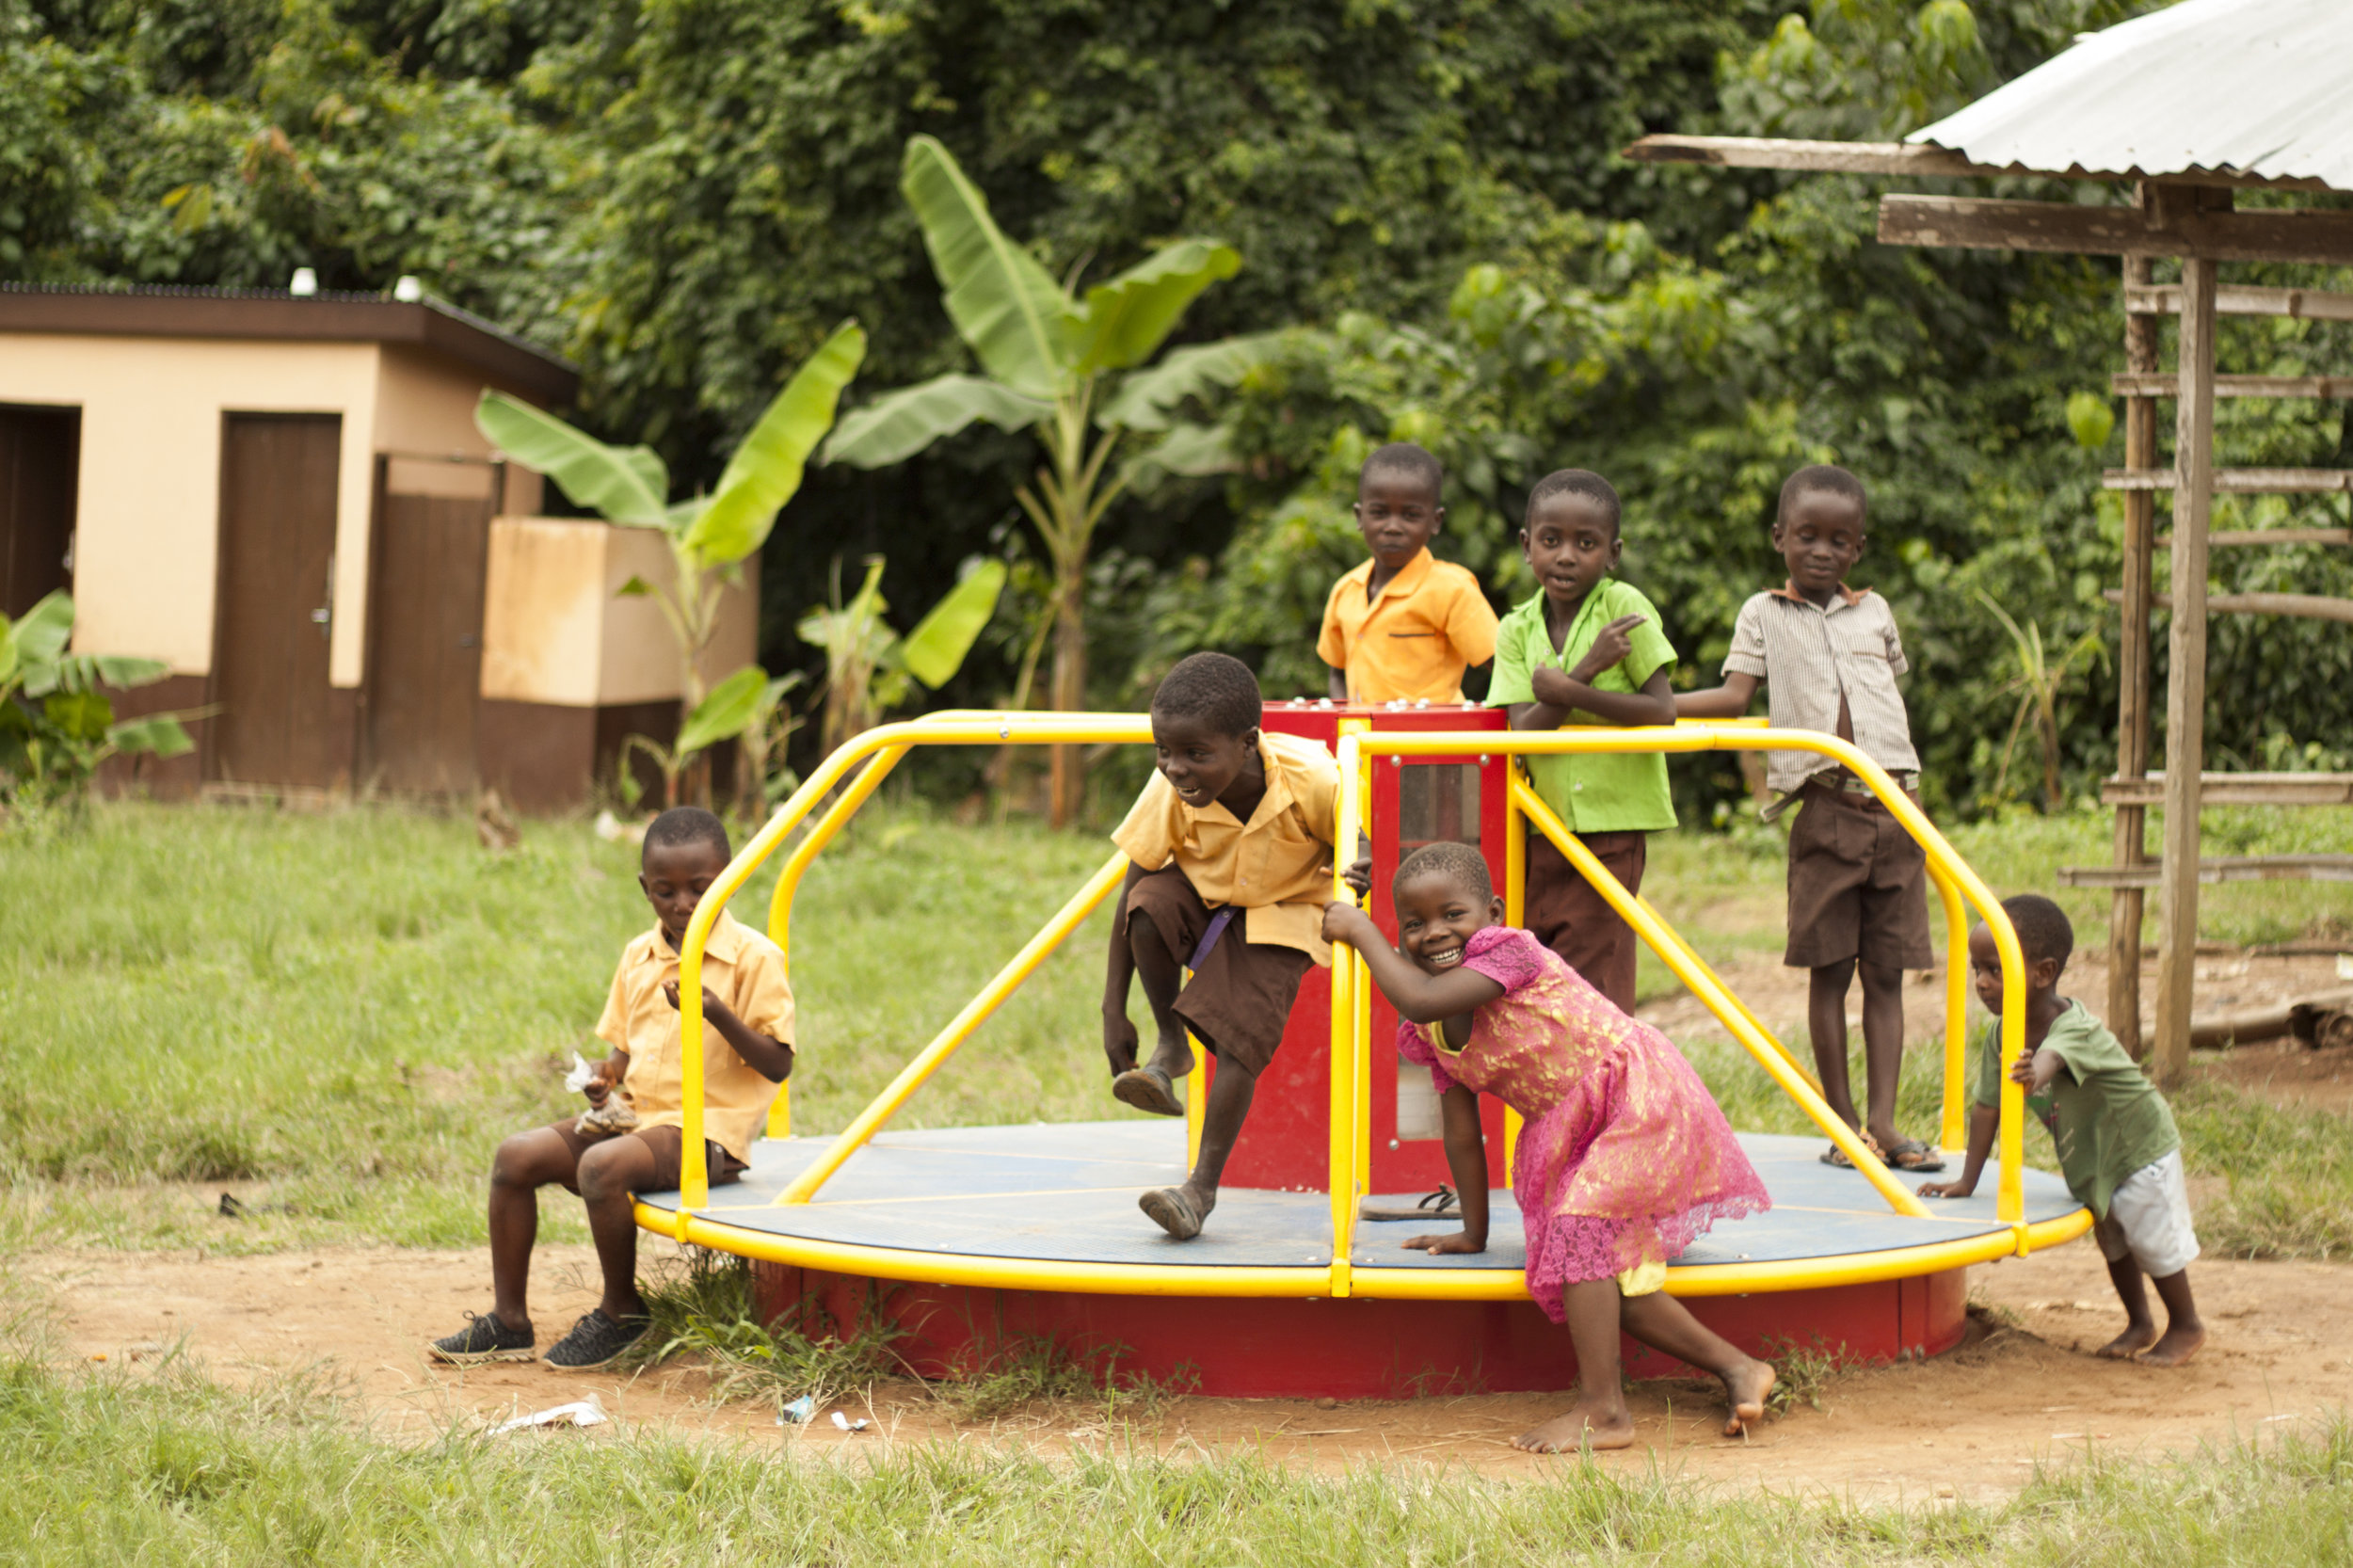 Without electricity, children in Ghana cannot study at home during their only time to do homework--night. This problem is solved when children play on EPI equipment which uses the children's energy to charge a battery.